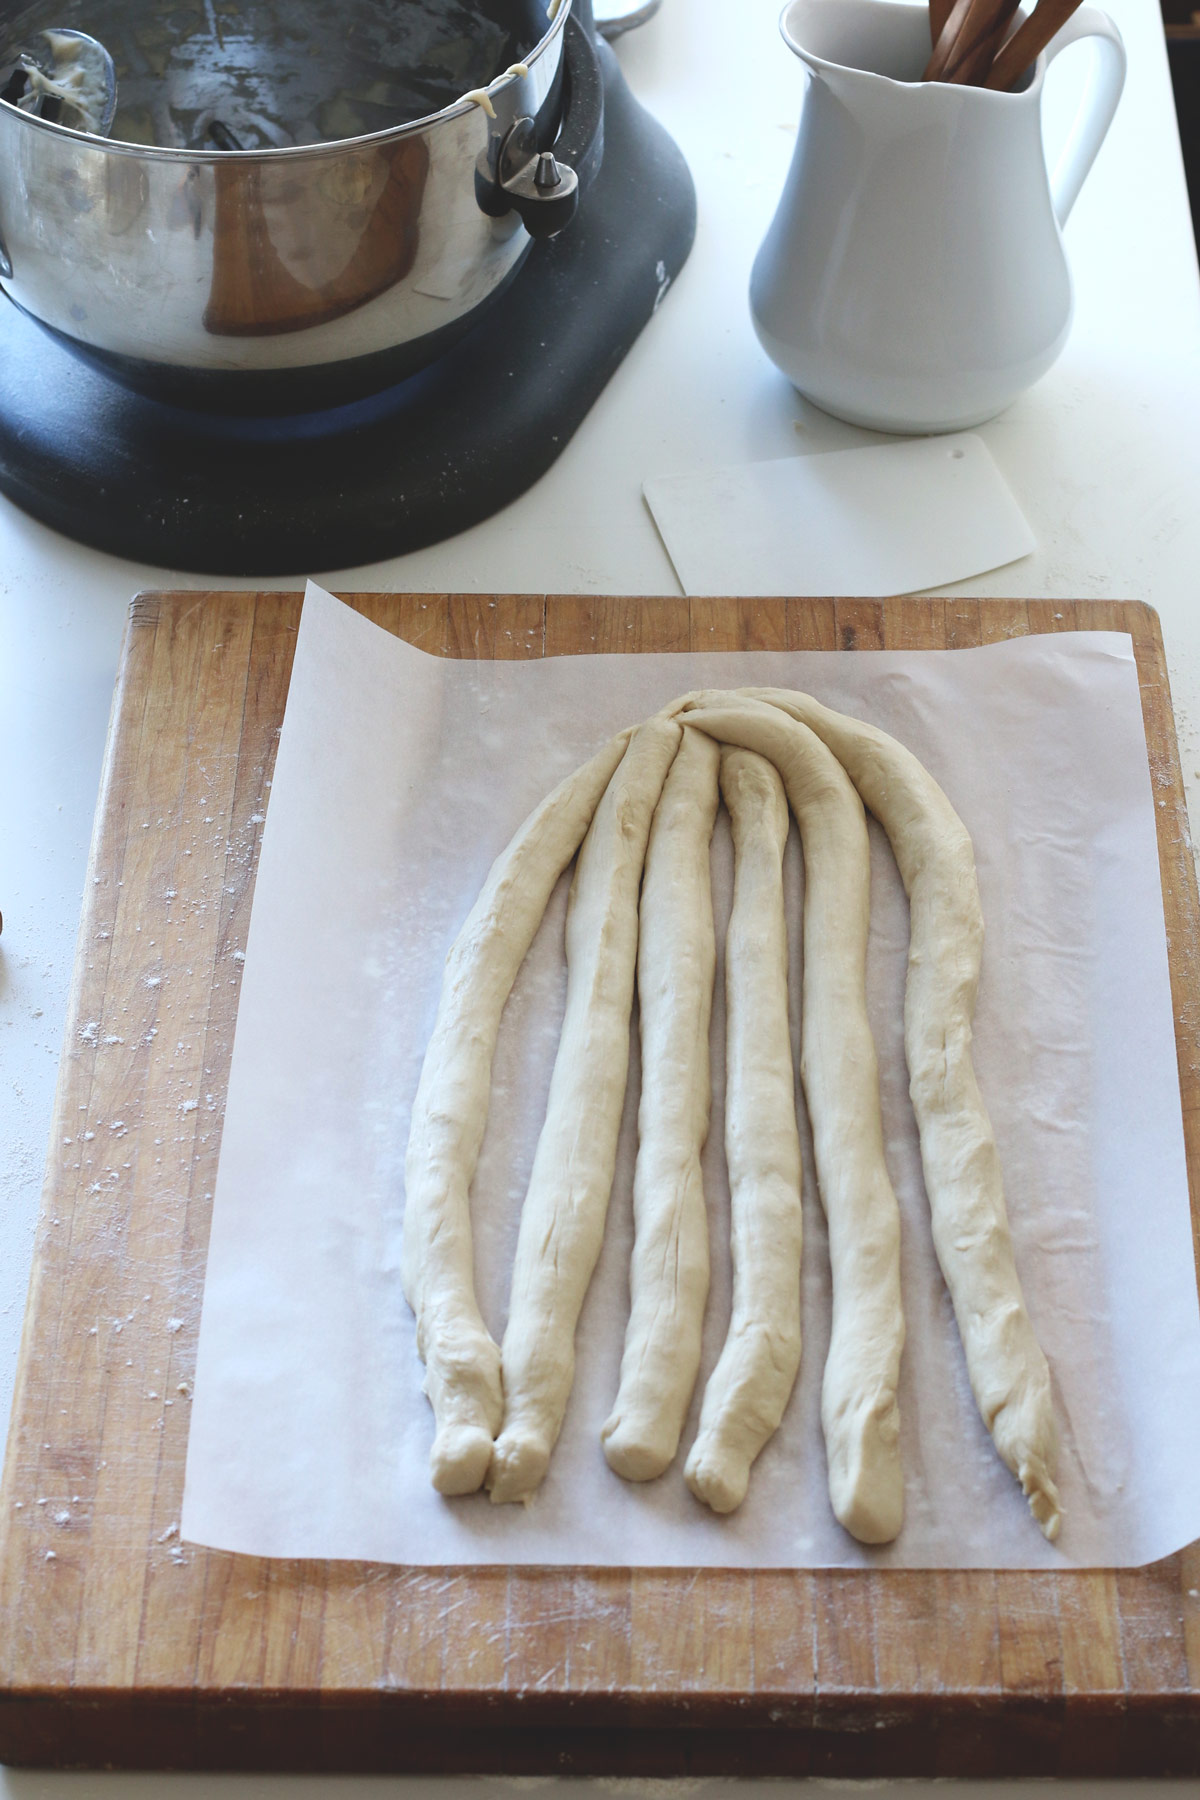 Braided bread how-to